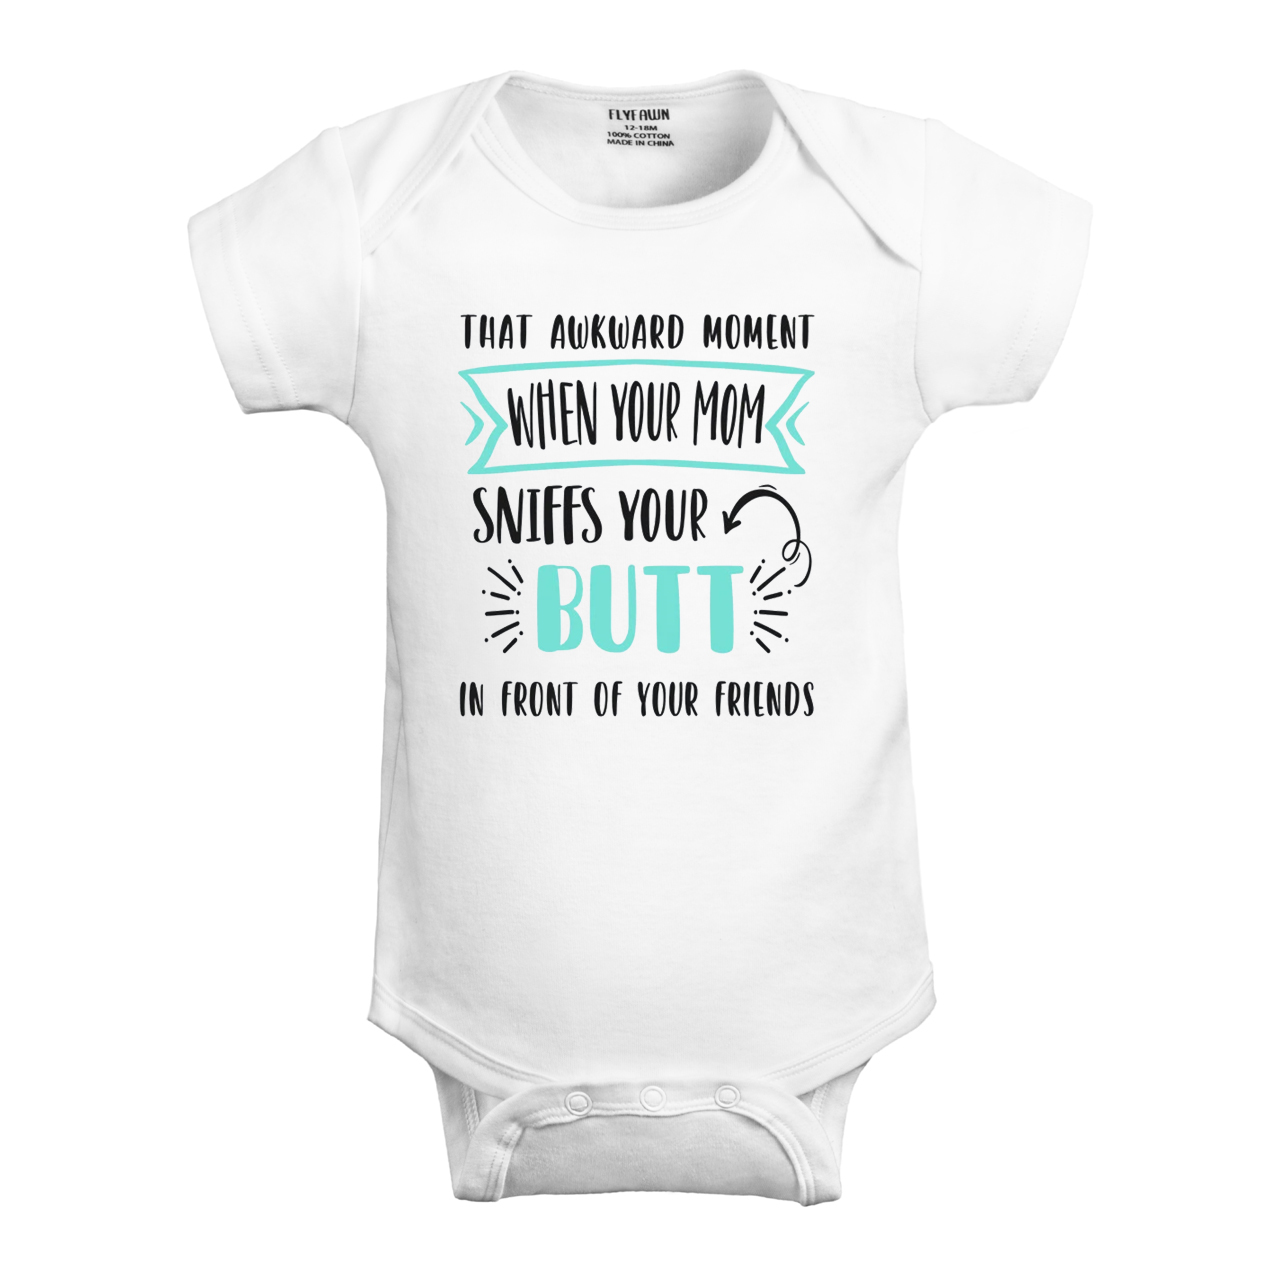 Awkward Moment Mom Sniffs Your Butt,Baby Bodysuit